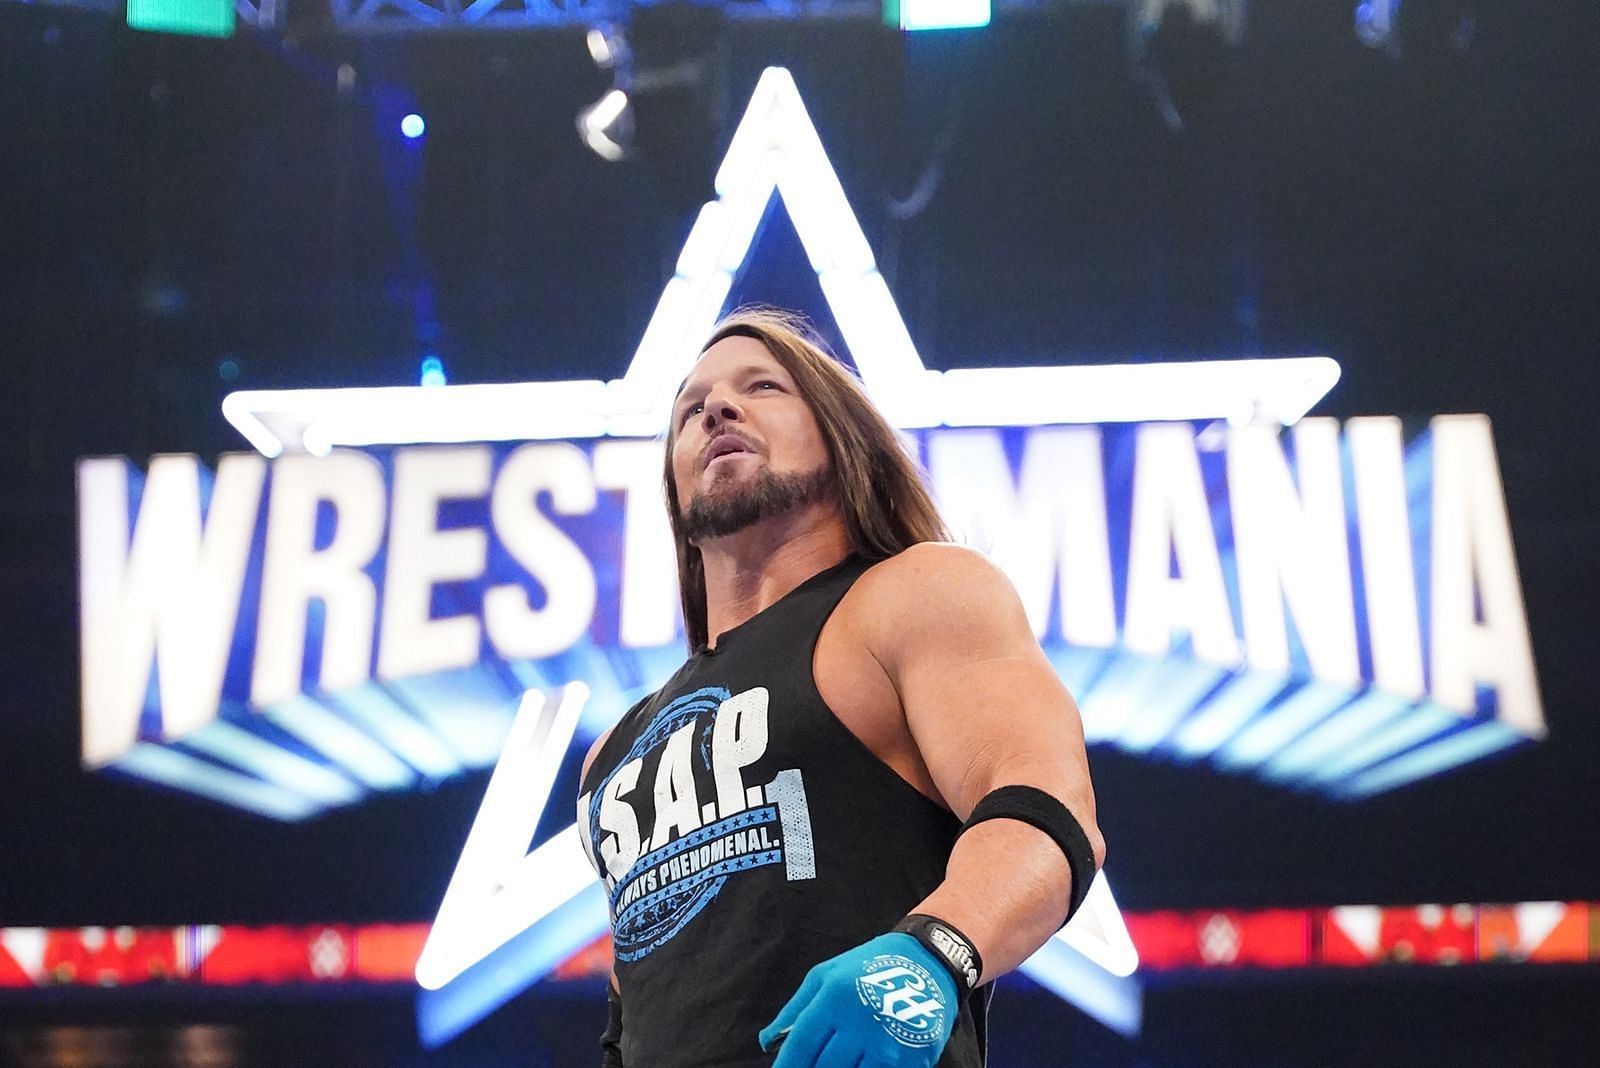 AJ Styles has plenty of experience running with dangerous stables.